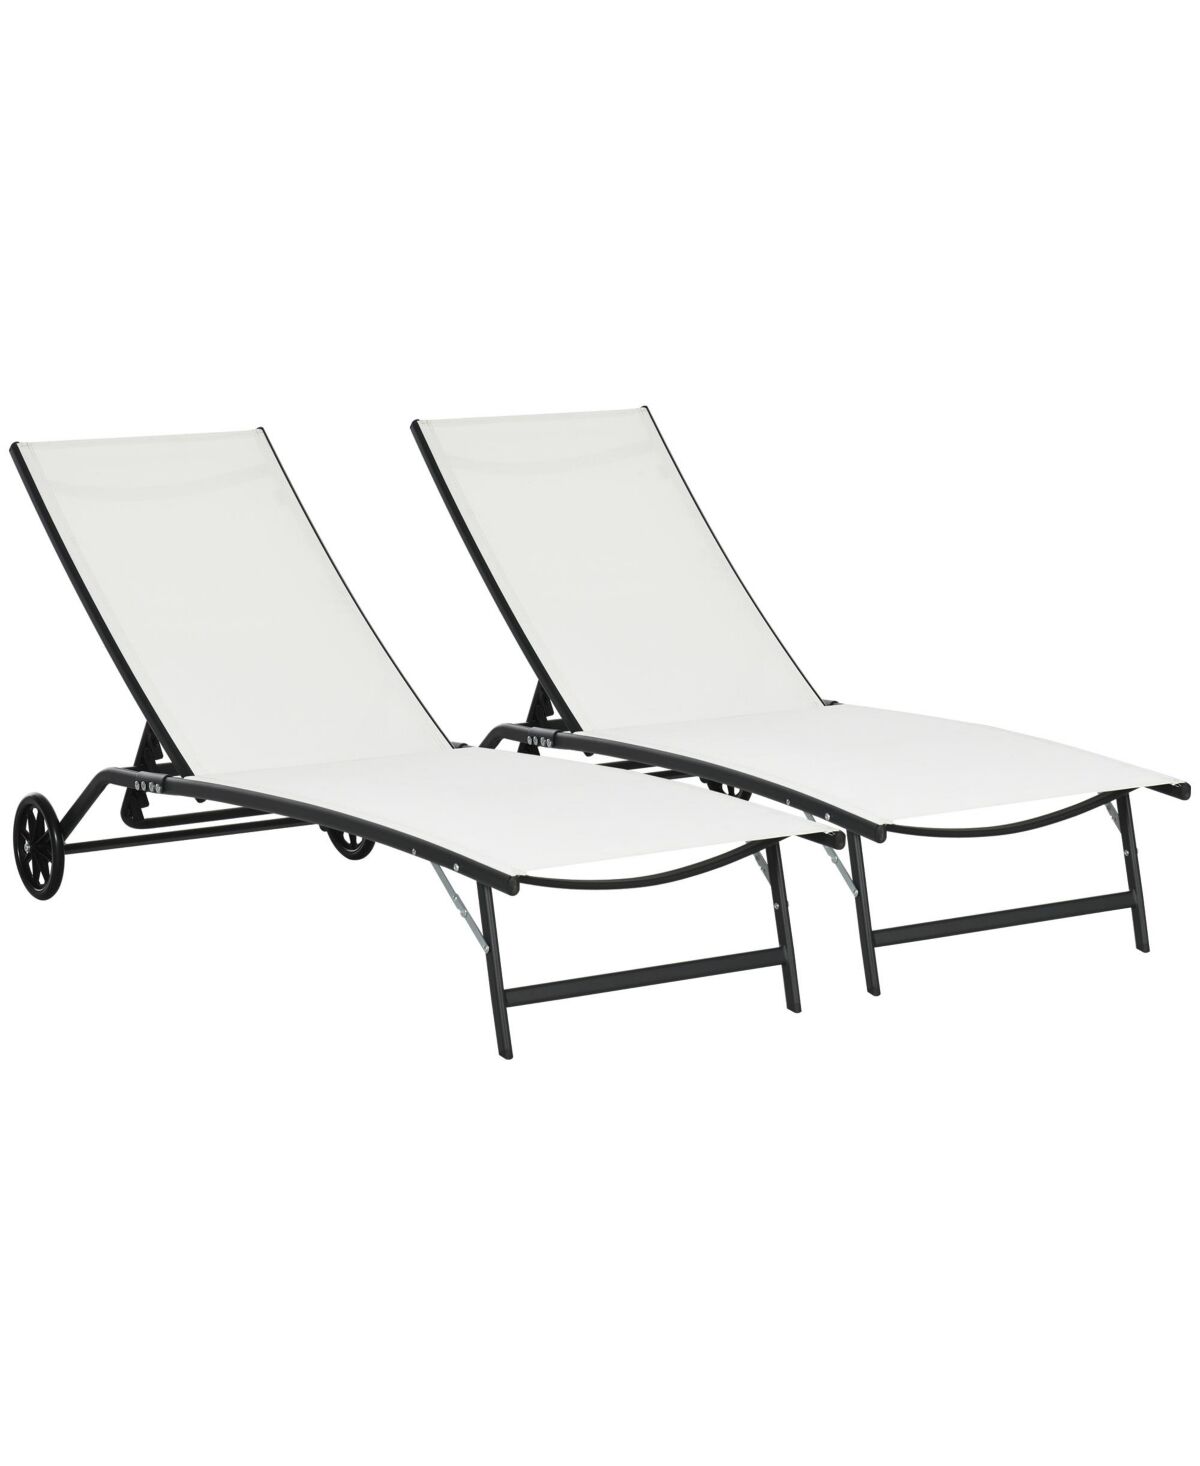 Outsunny Patio Chaise Lounge Chair Set of 2, 2 Piece Outdoor Recliner with Wheels, 5 Level Adjustable Backrest for Garden, Deck & Poolside, Cream Whit